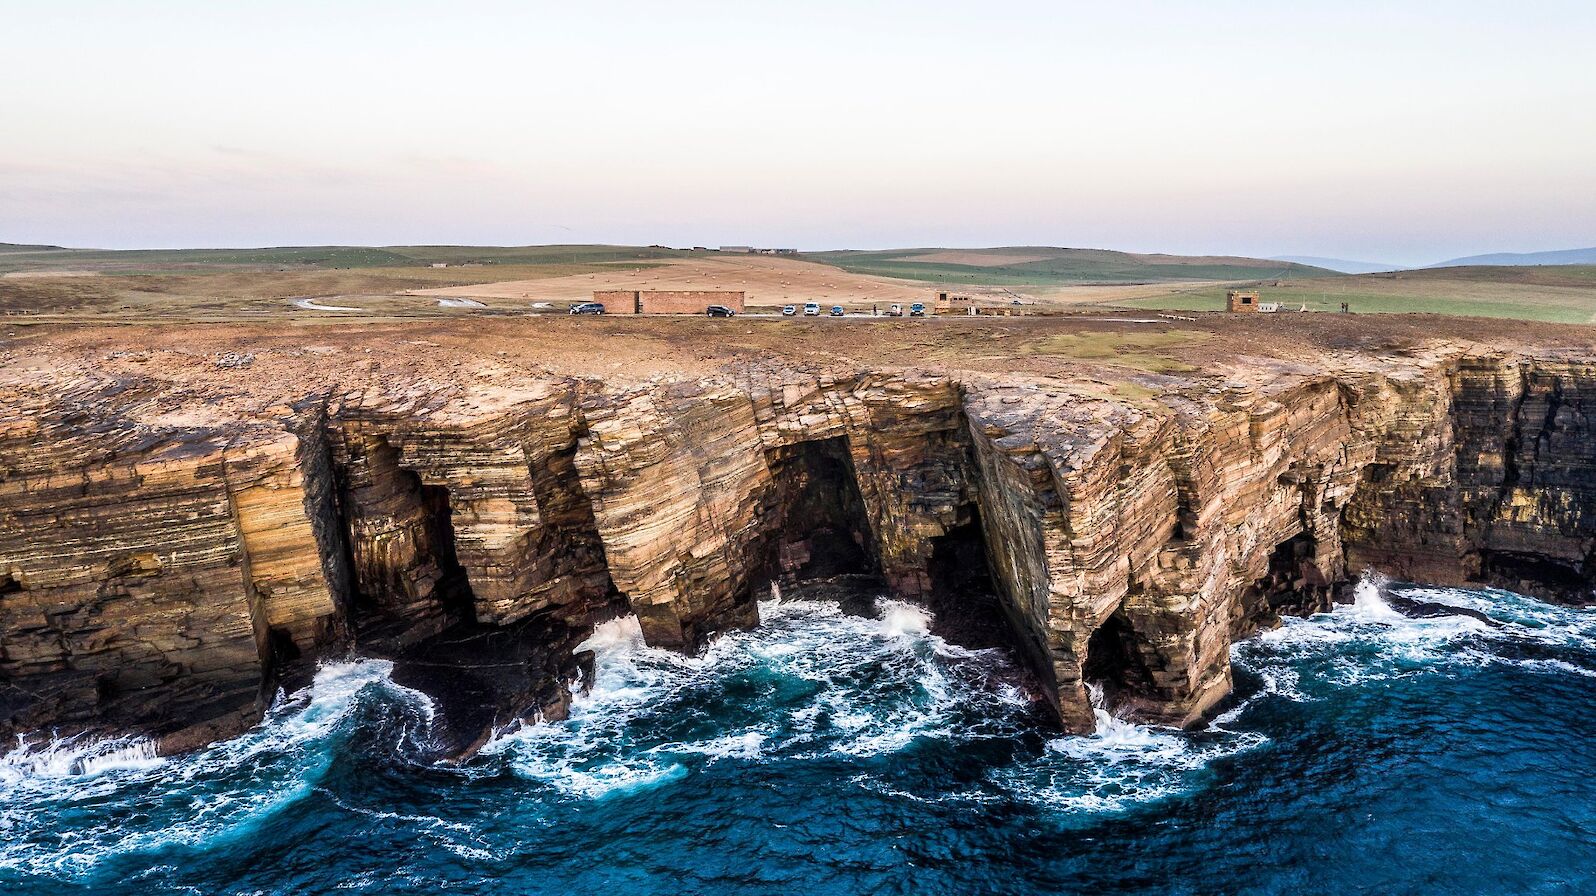 The cliffs at Yesnaby - image by Andras Farkas